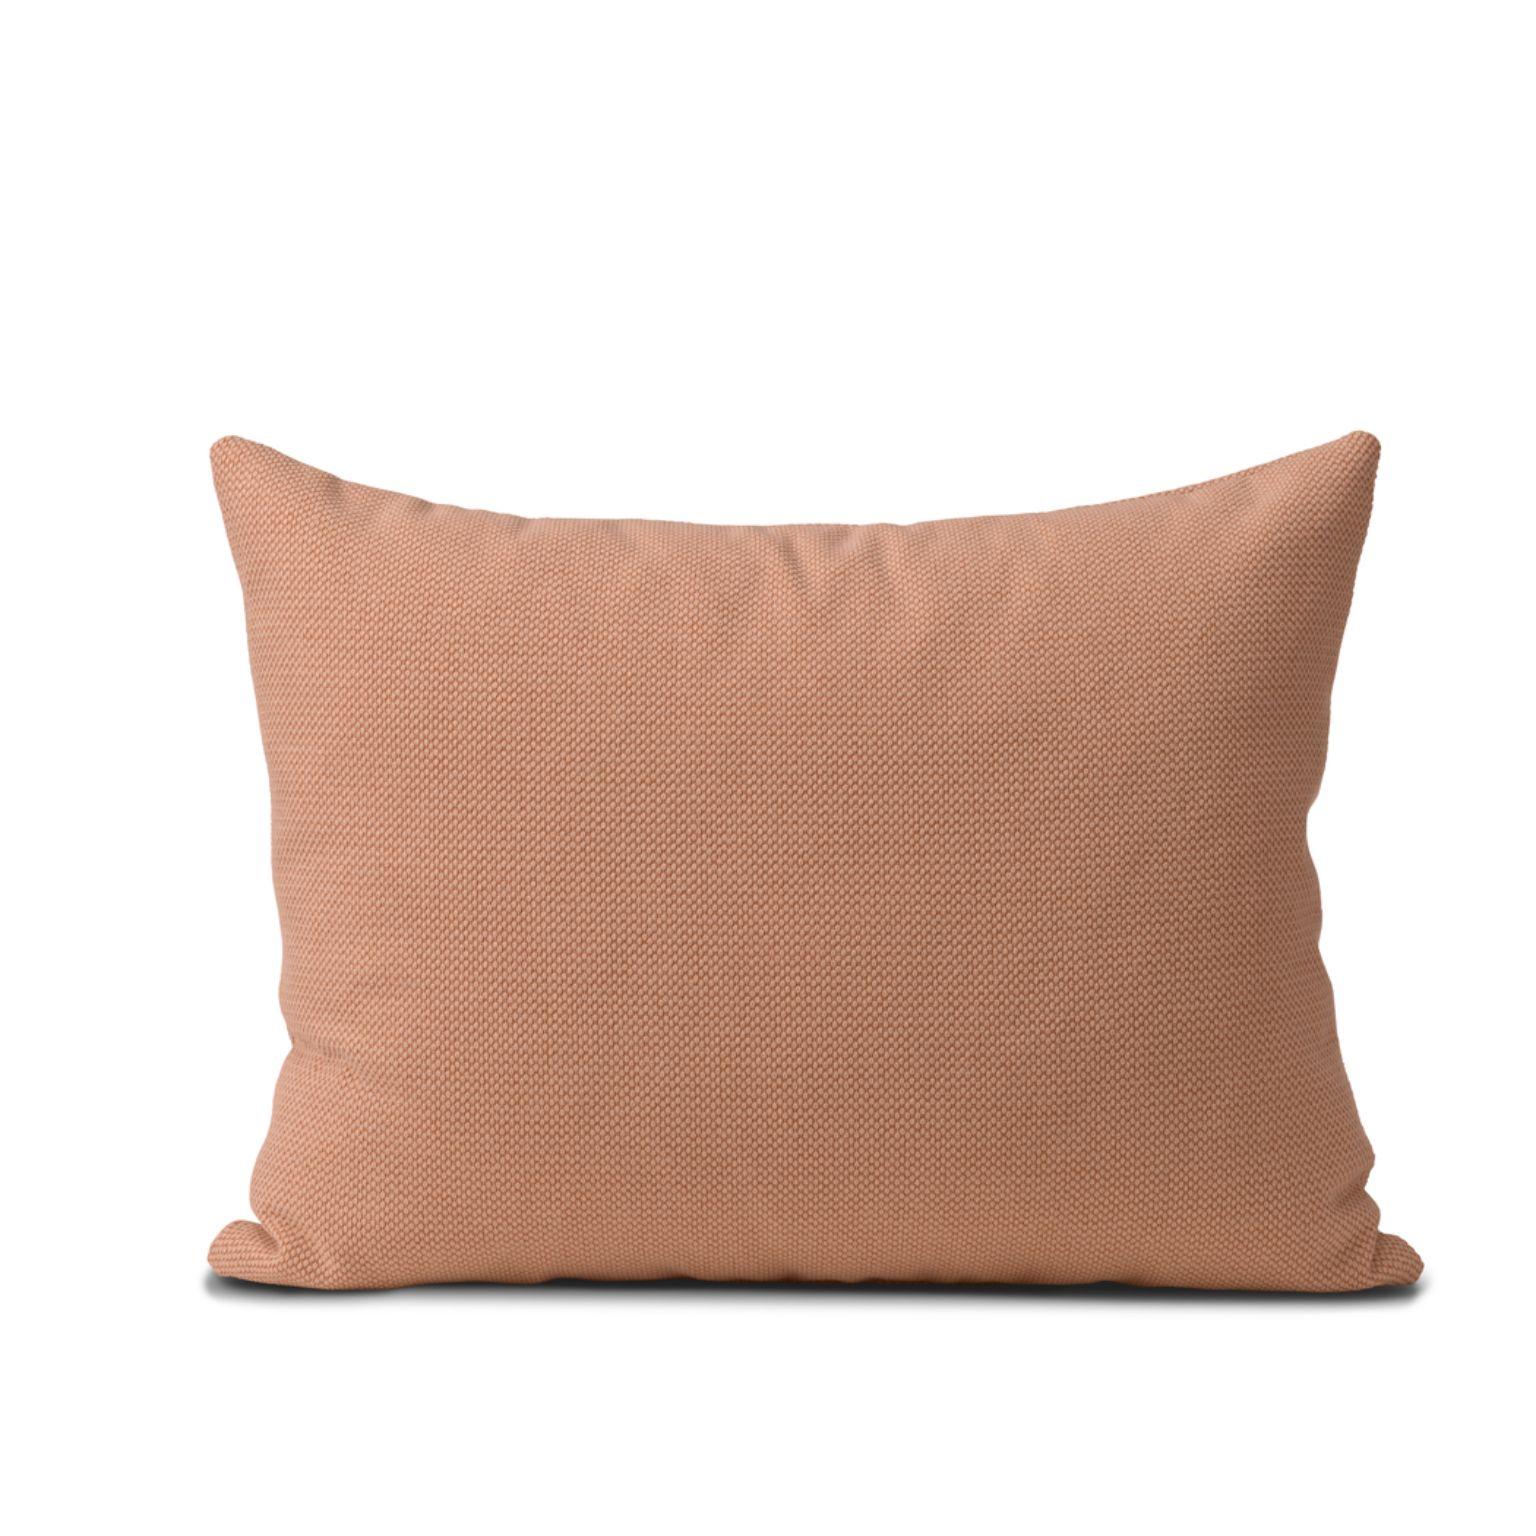 Galore cushion square fresh peach by Warm Nordic.
Dimensions: D70 x H 50 cm.
Material: Textile upholstery, Granulate and feathers filling.
Weight: 1.4 kg
Also available in different colours and finishes. 

An elegant oversized sofa cushion,